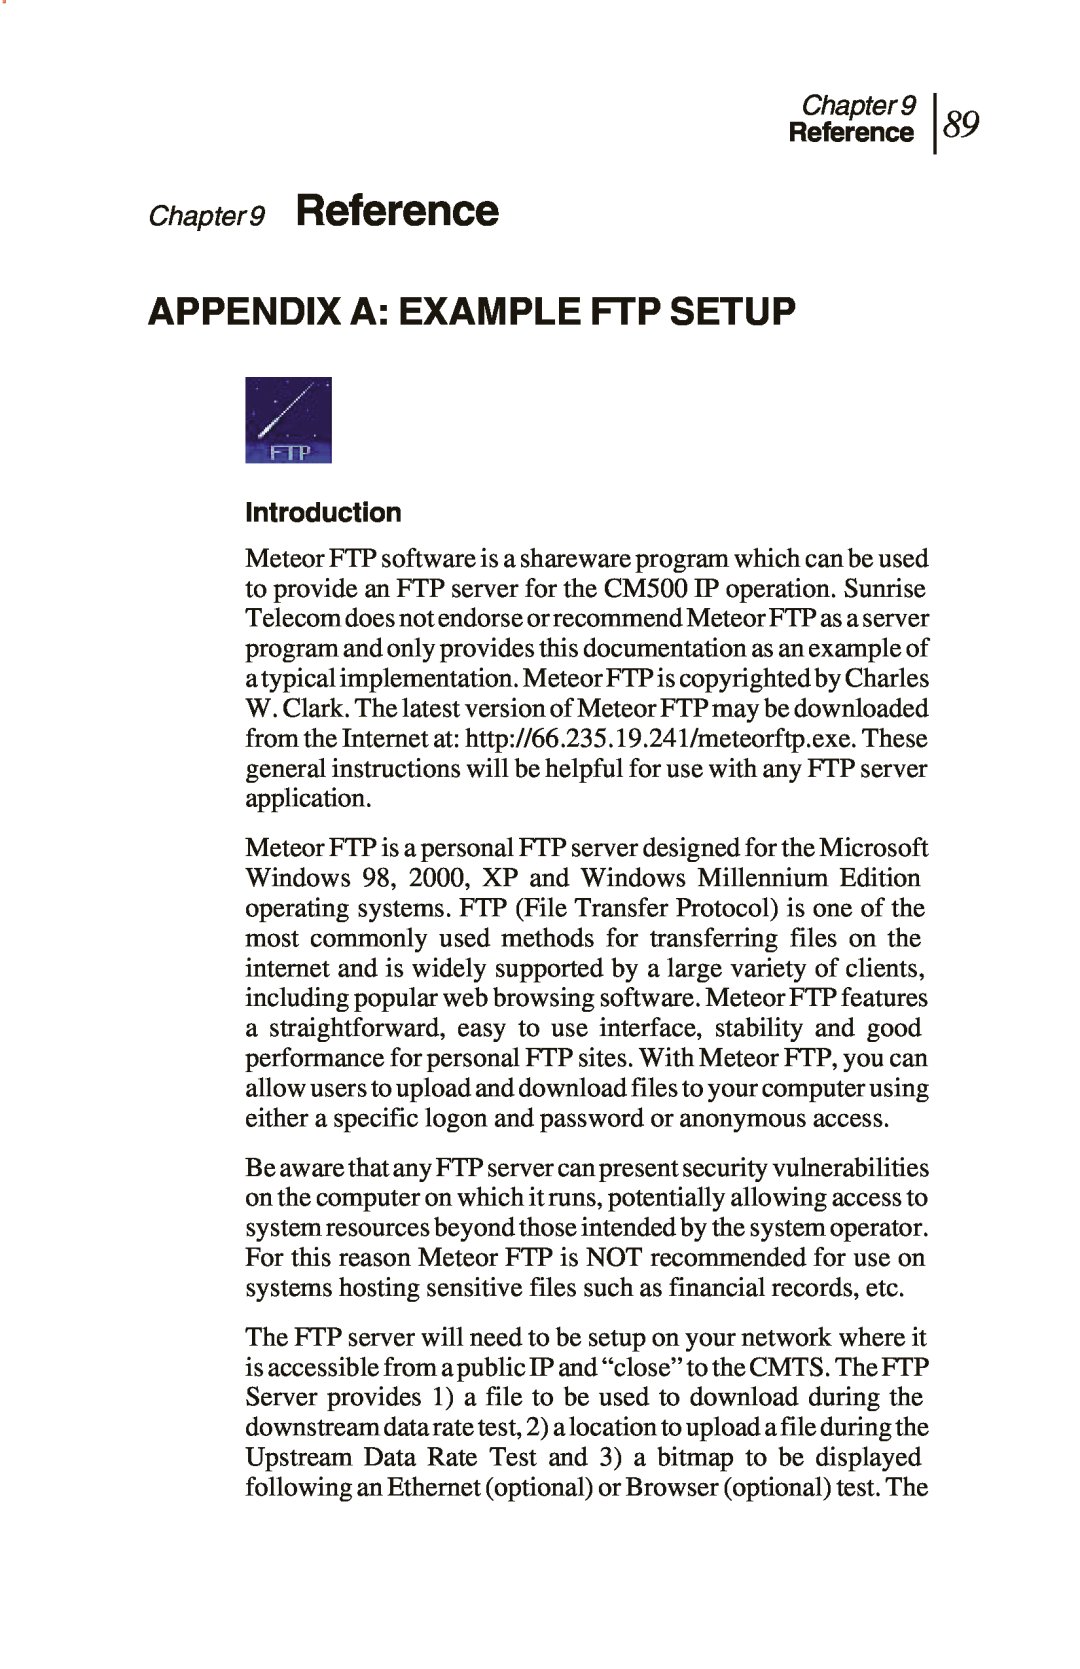 Sunrise Global CM250 IP, CM100 IP, and CM500 IP manual Appendix A: Example Ftp Setup, Reference, Introduction, Chapter 